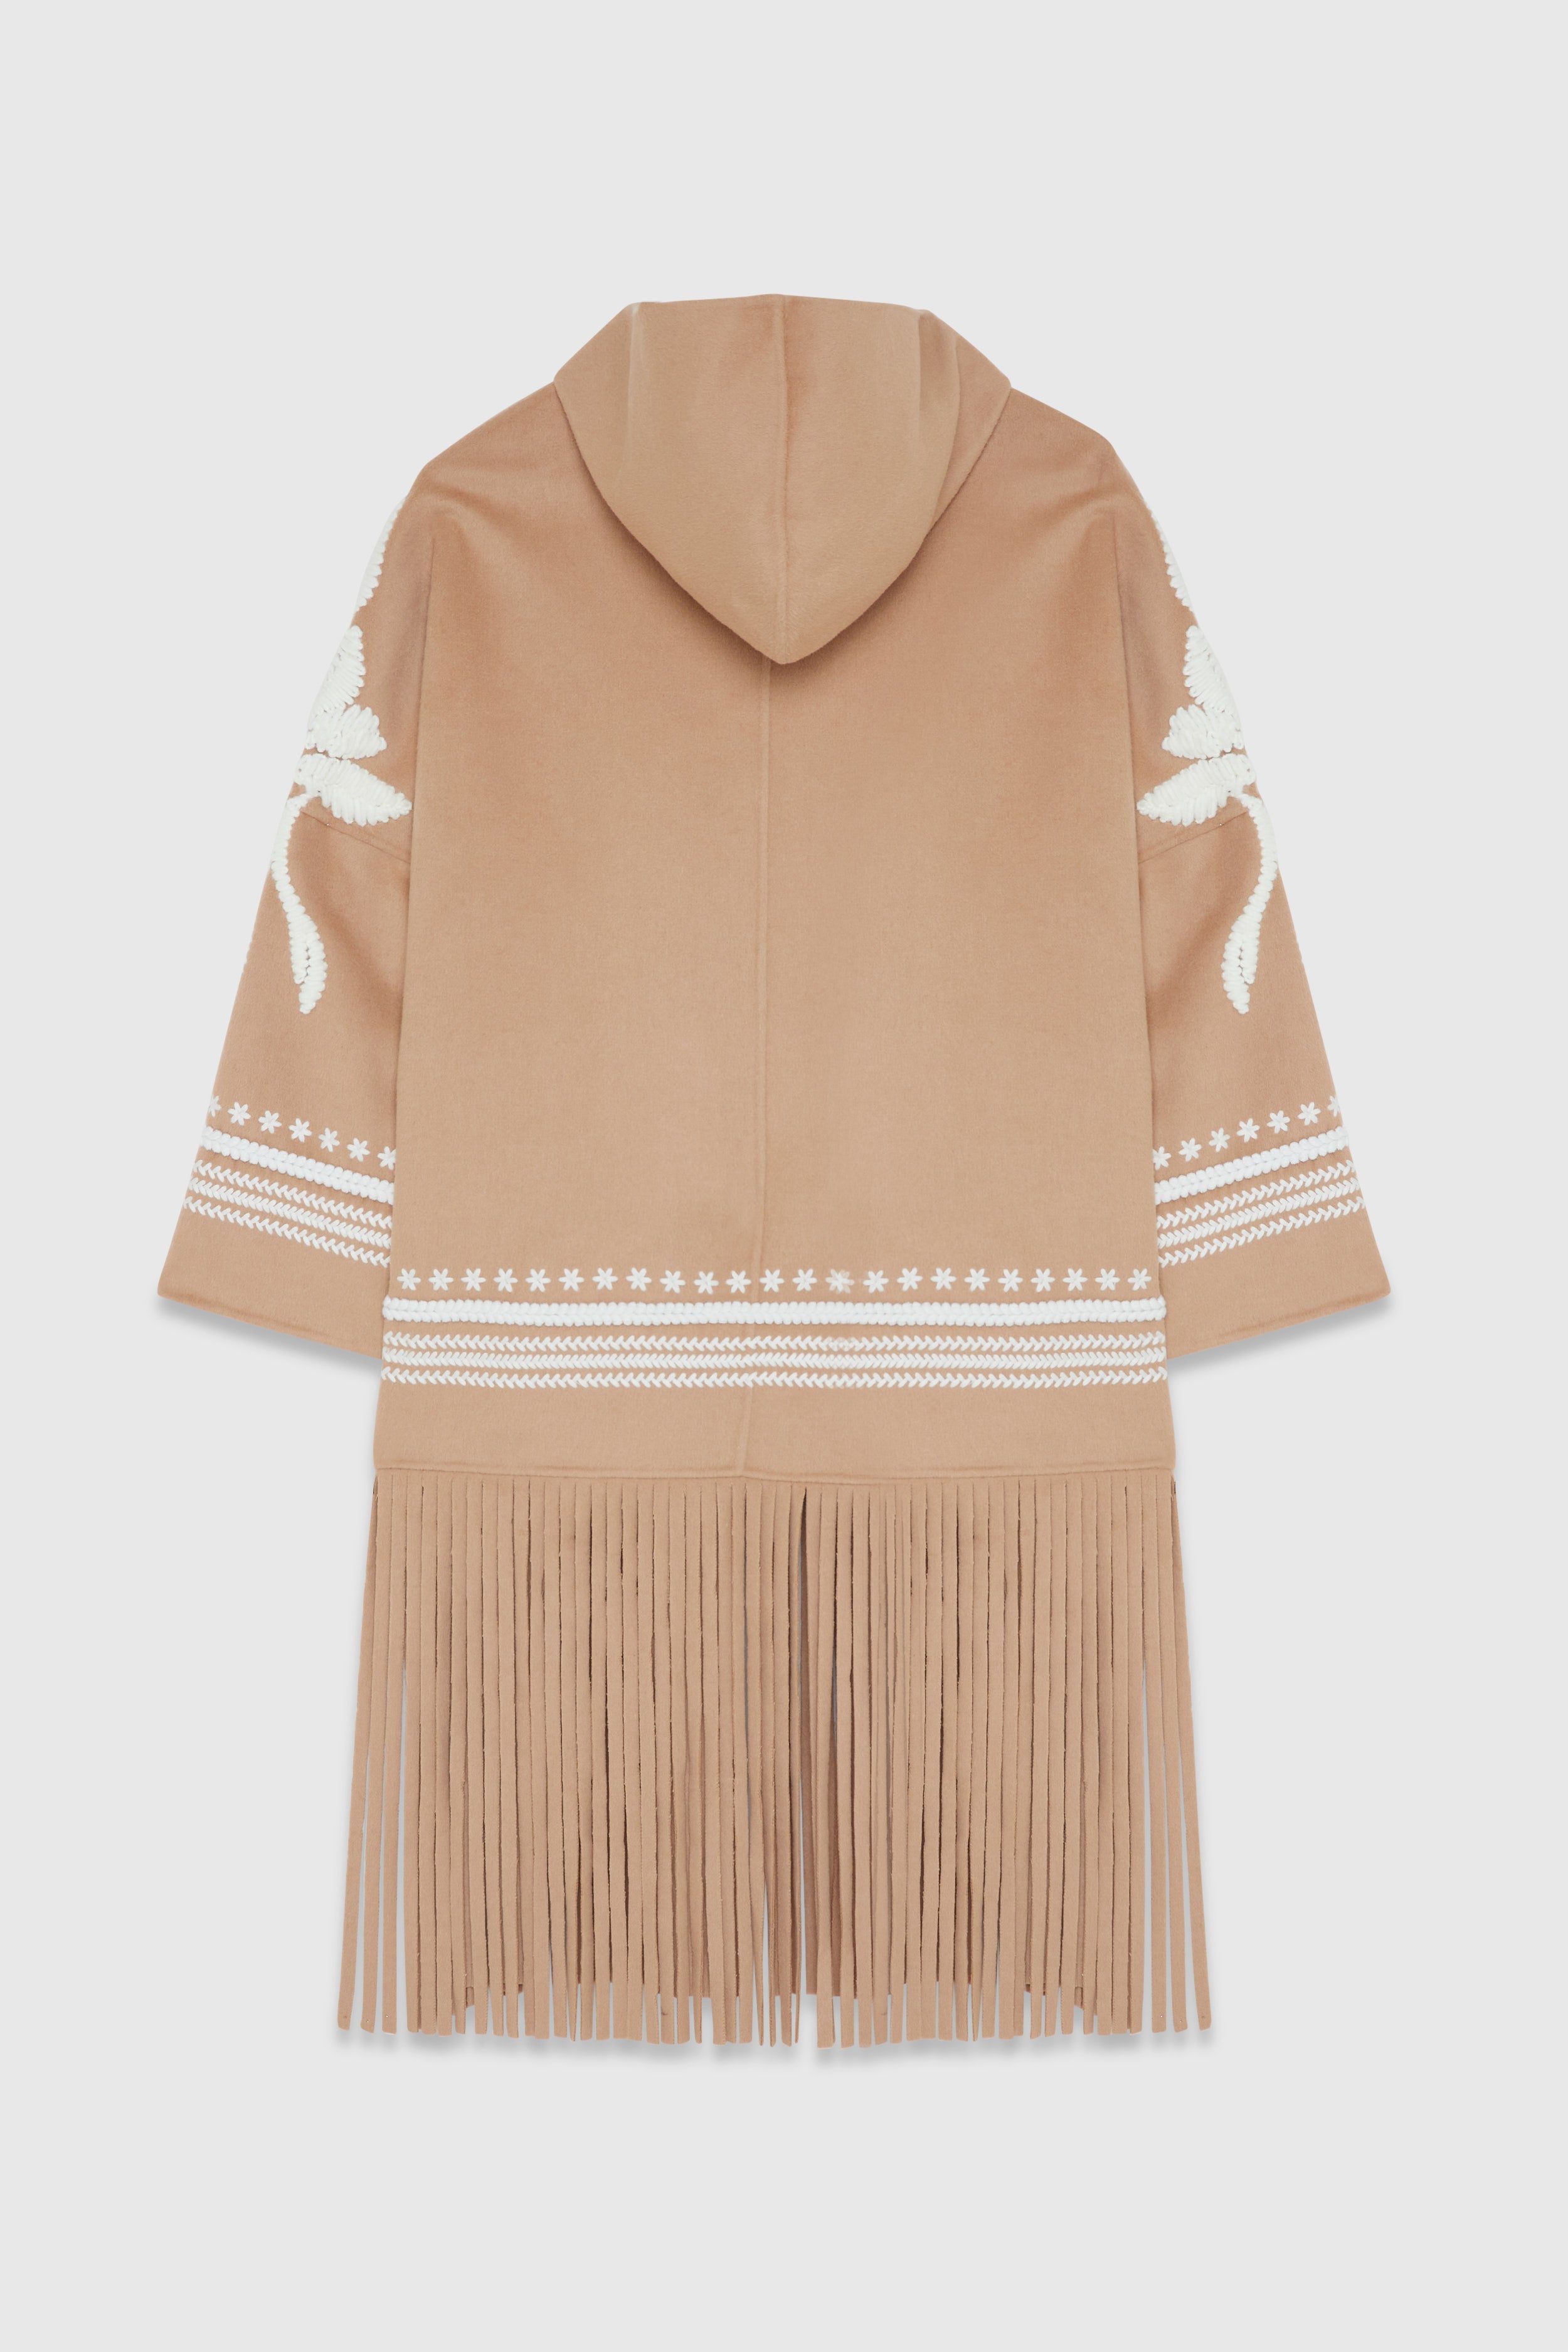 Embroidered Coat With Fringes